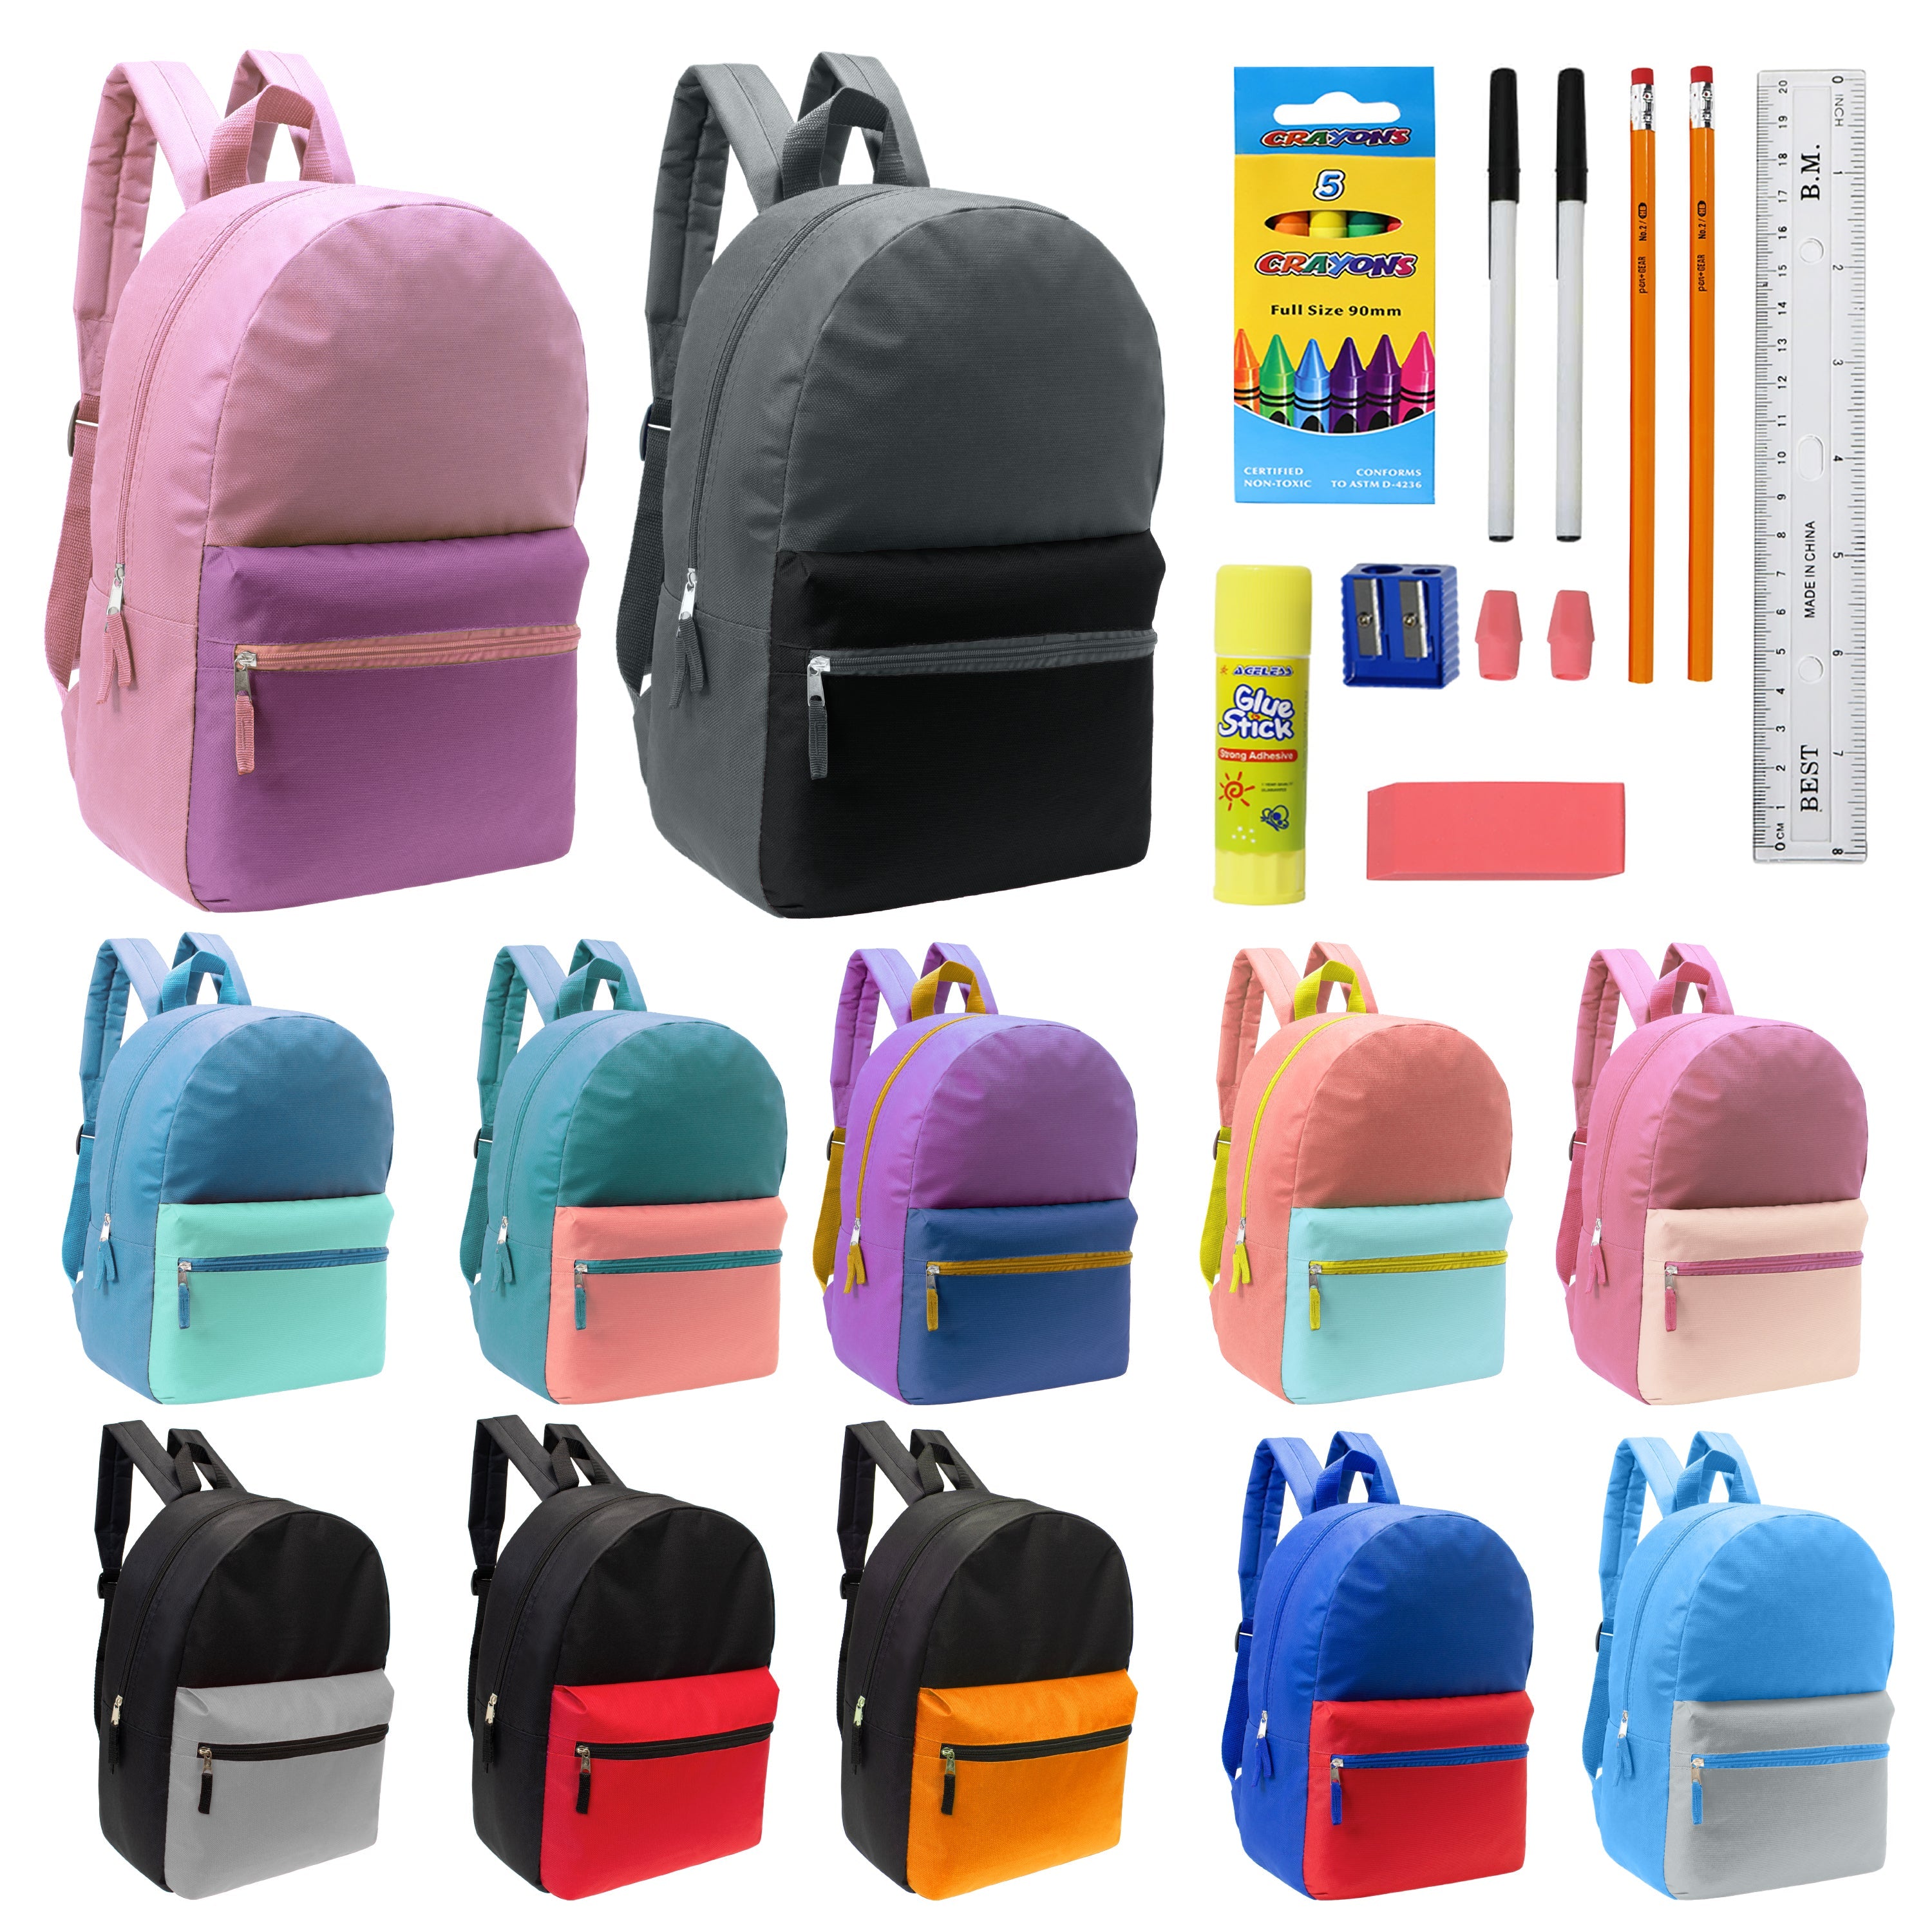 12 Wholesale Multi Color Student Backpacks in Assorted Colors and 12 Bulk School Supply Kits of Your Choice